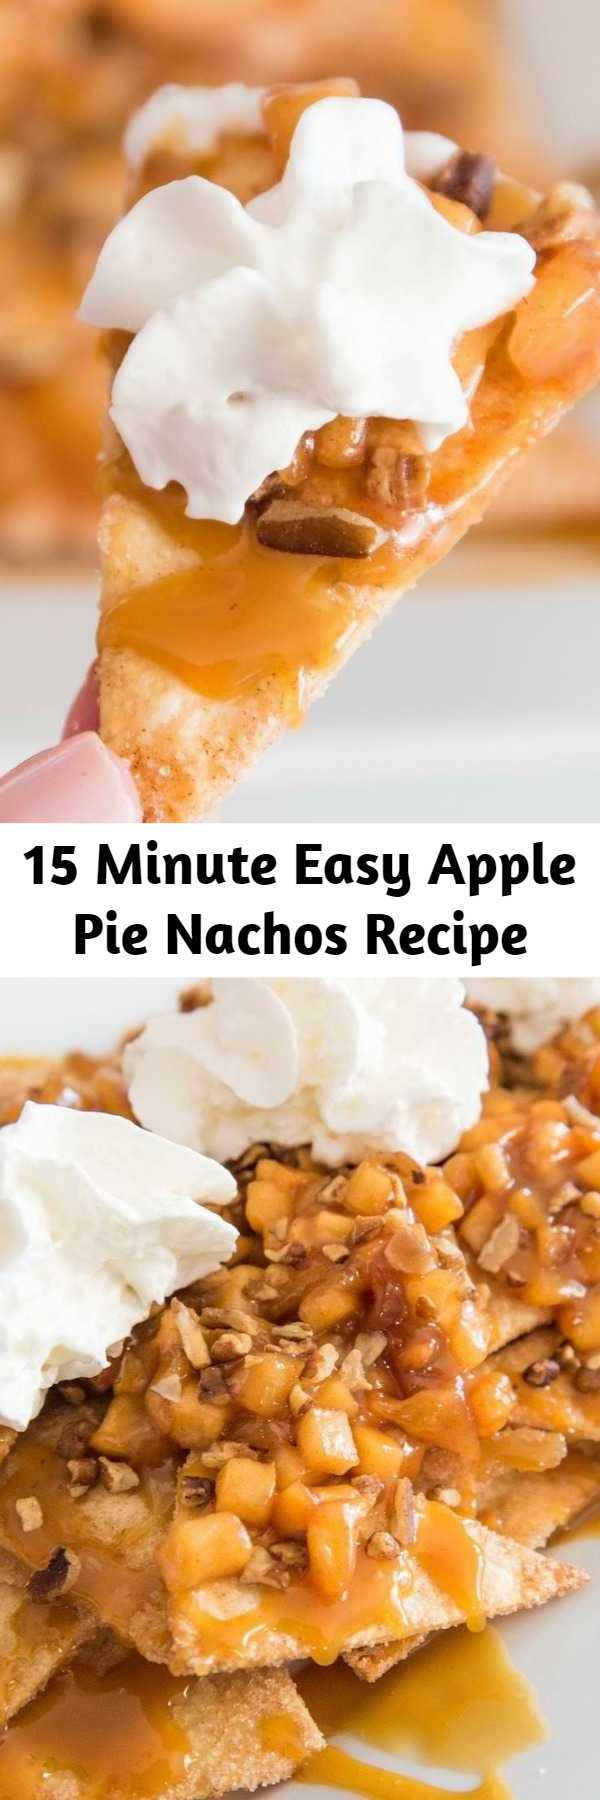 15 Minute Easy Apple Pie Nachos Recipe - Easy Baked Apple Pie Nachos – delicious cinnamon sugary apple filling on warm, crispy and sweet nachos, topped with pecans, drizzled with caramel sauce, and then topped with whipped cream! The easiest dessert that comes together in no time. It’s the perfect way to serve apple pie to a crowd! Quick and easy recipe. An irresistible party dessert!